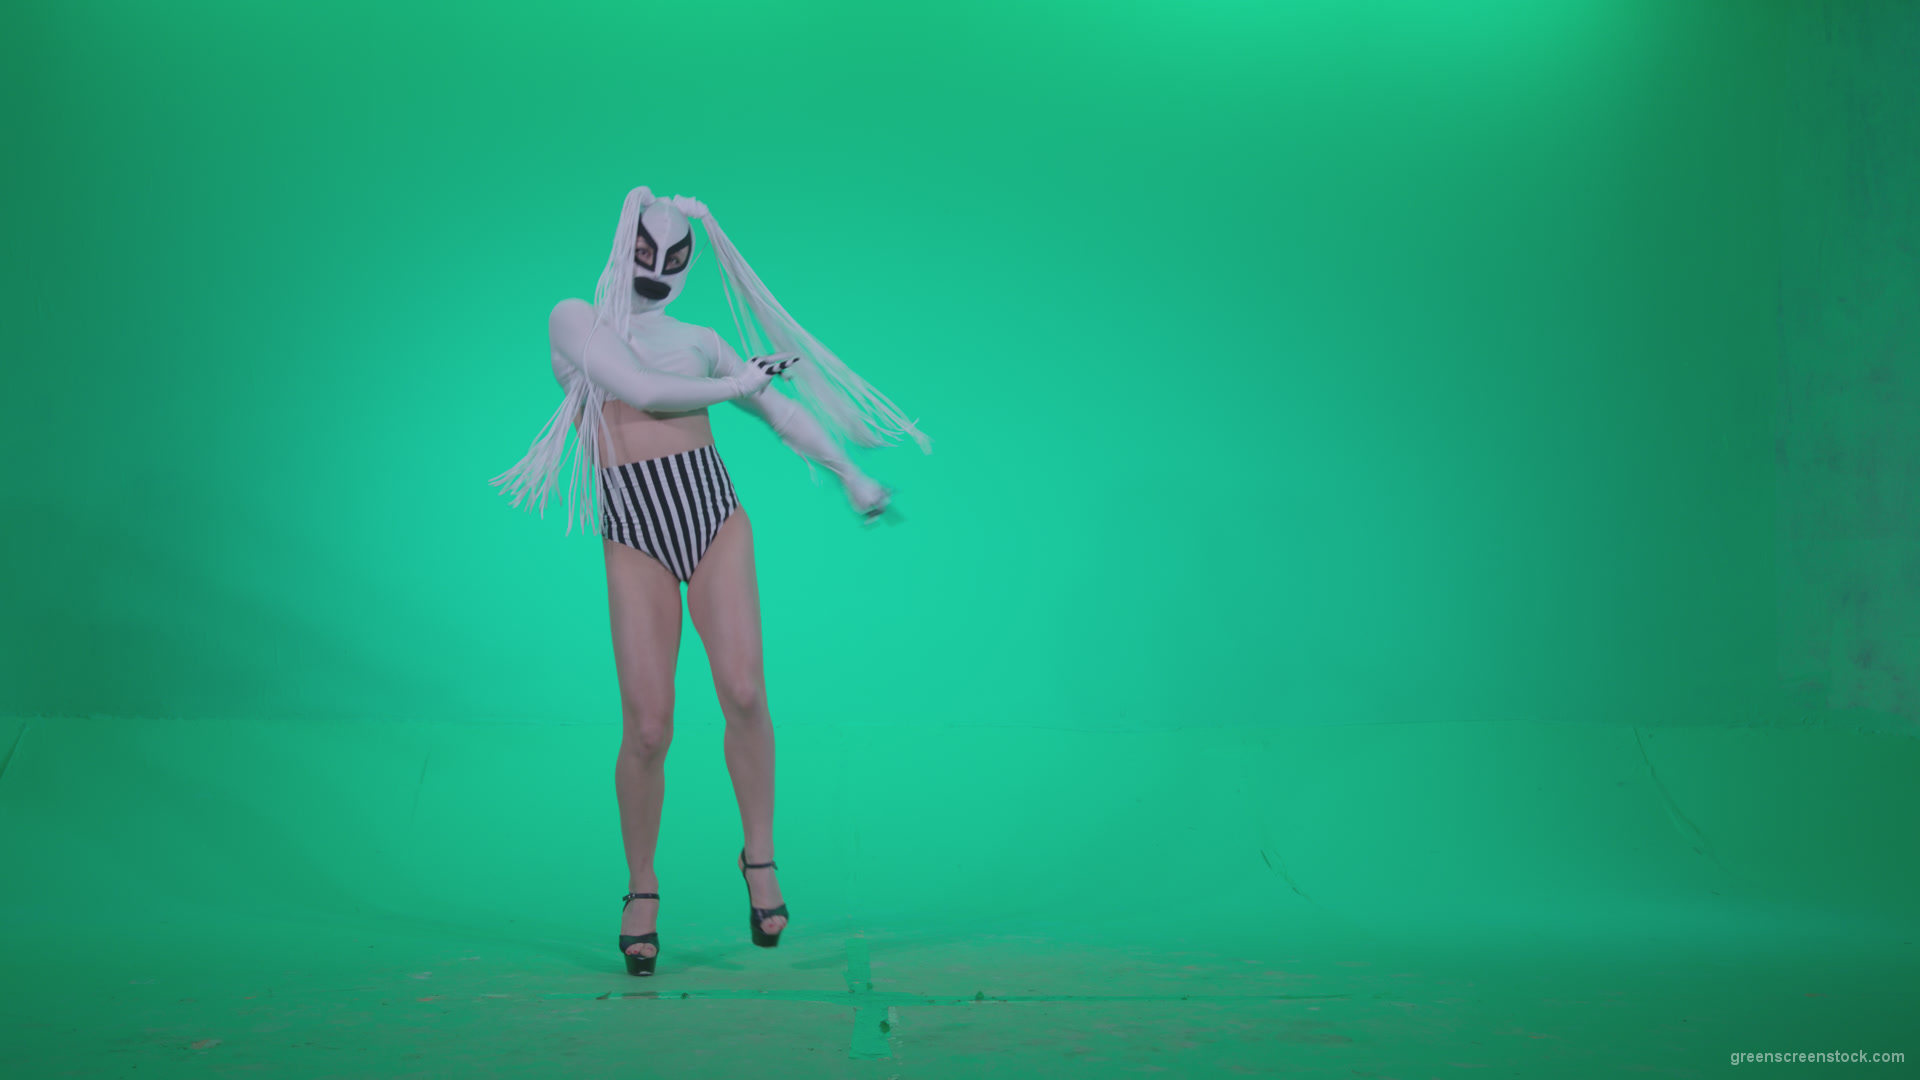 Go-go-Dancer-with-Latex-Top-t7-Green-Screen-Video-Footage_007 Green Screen Stock